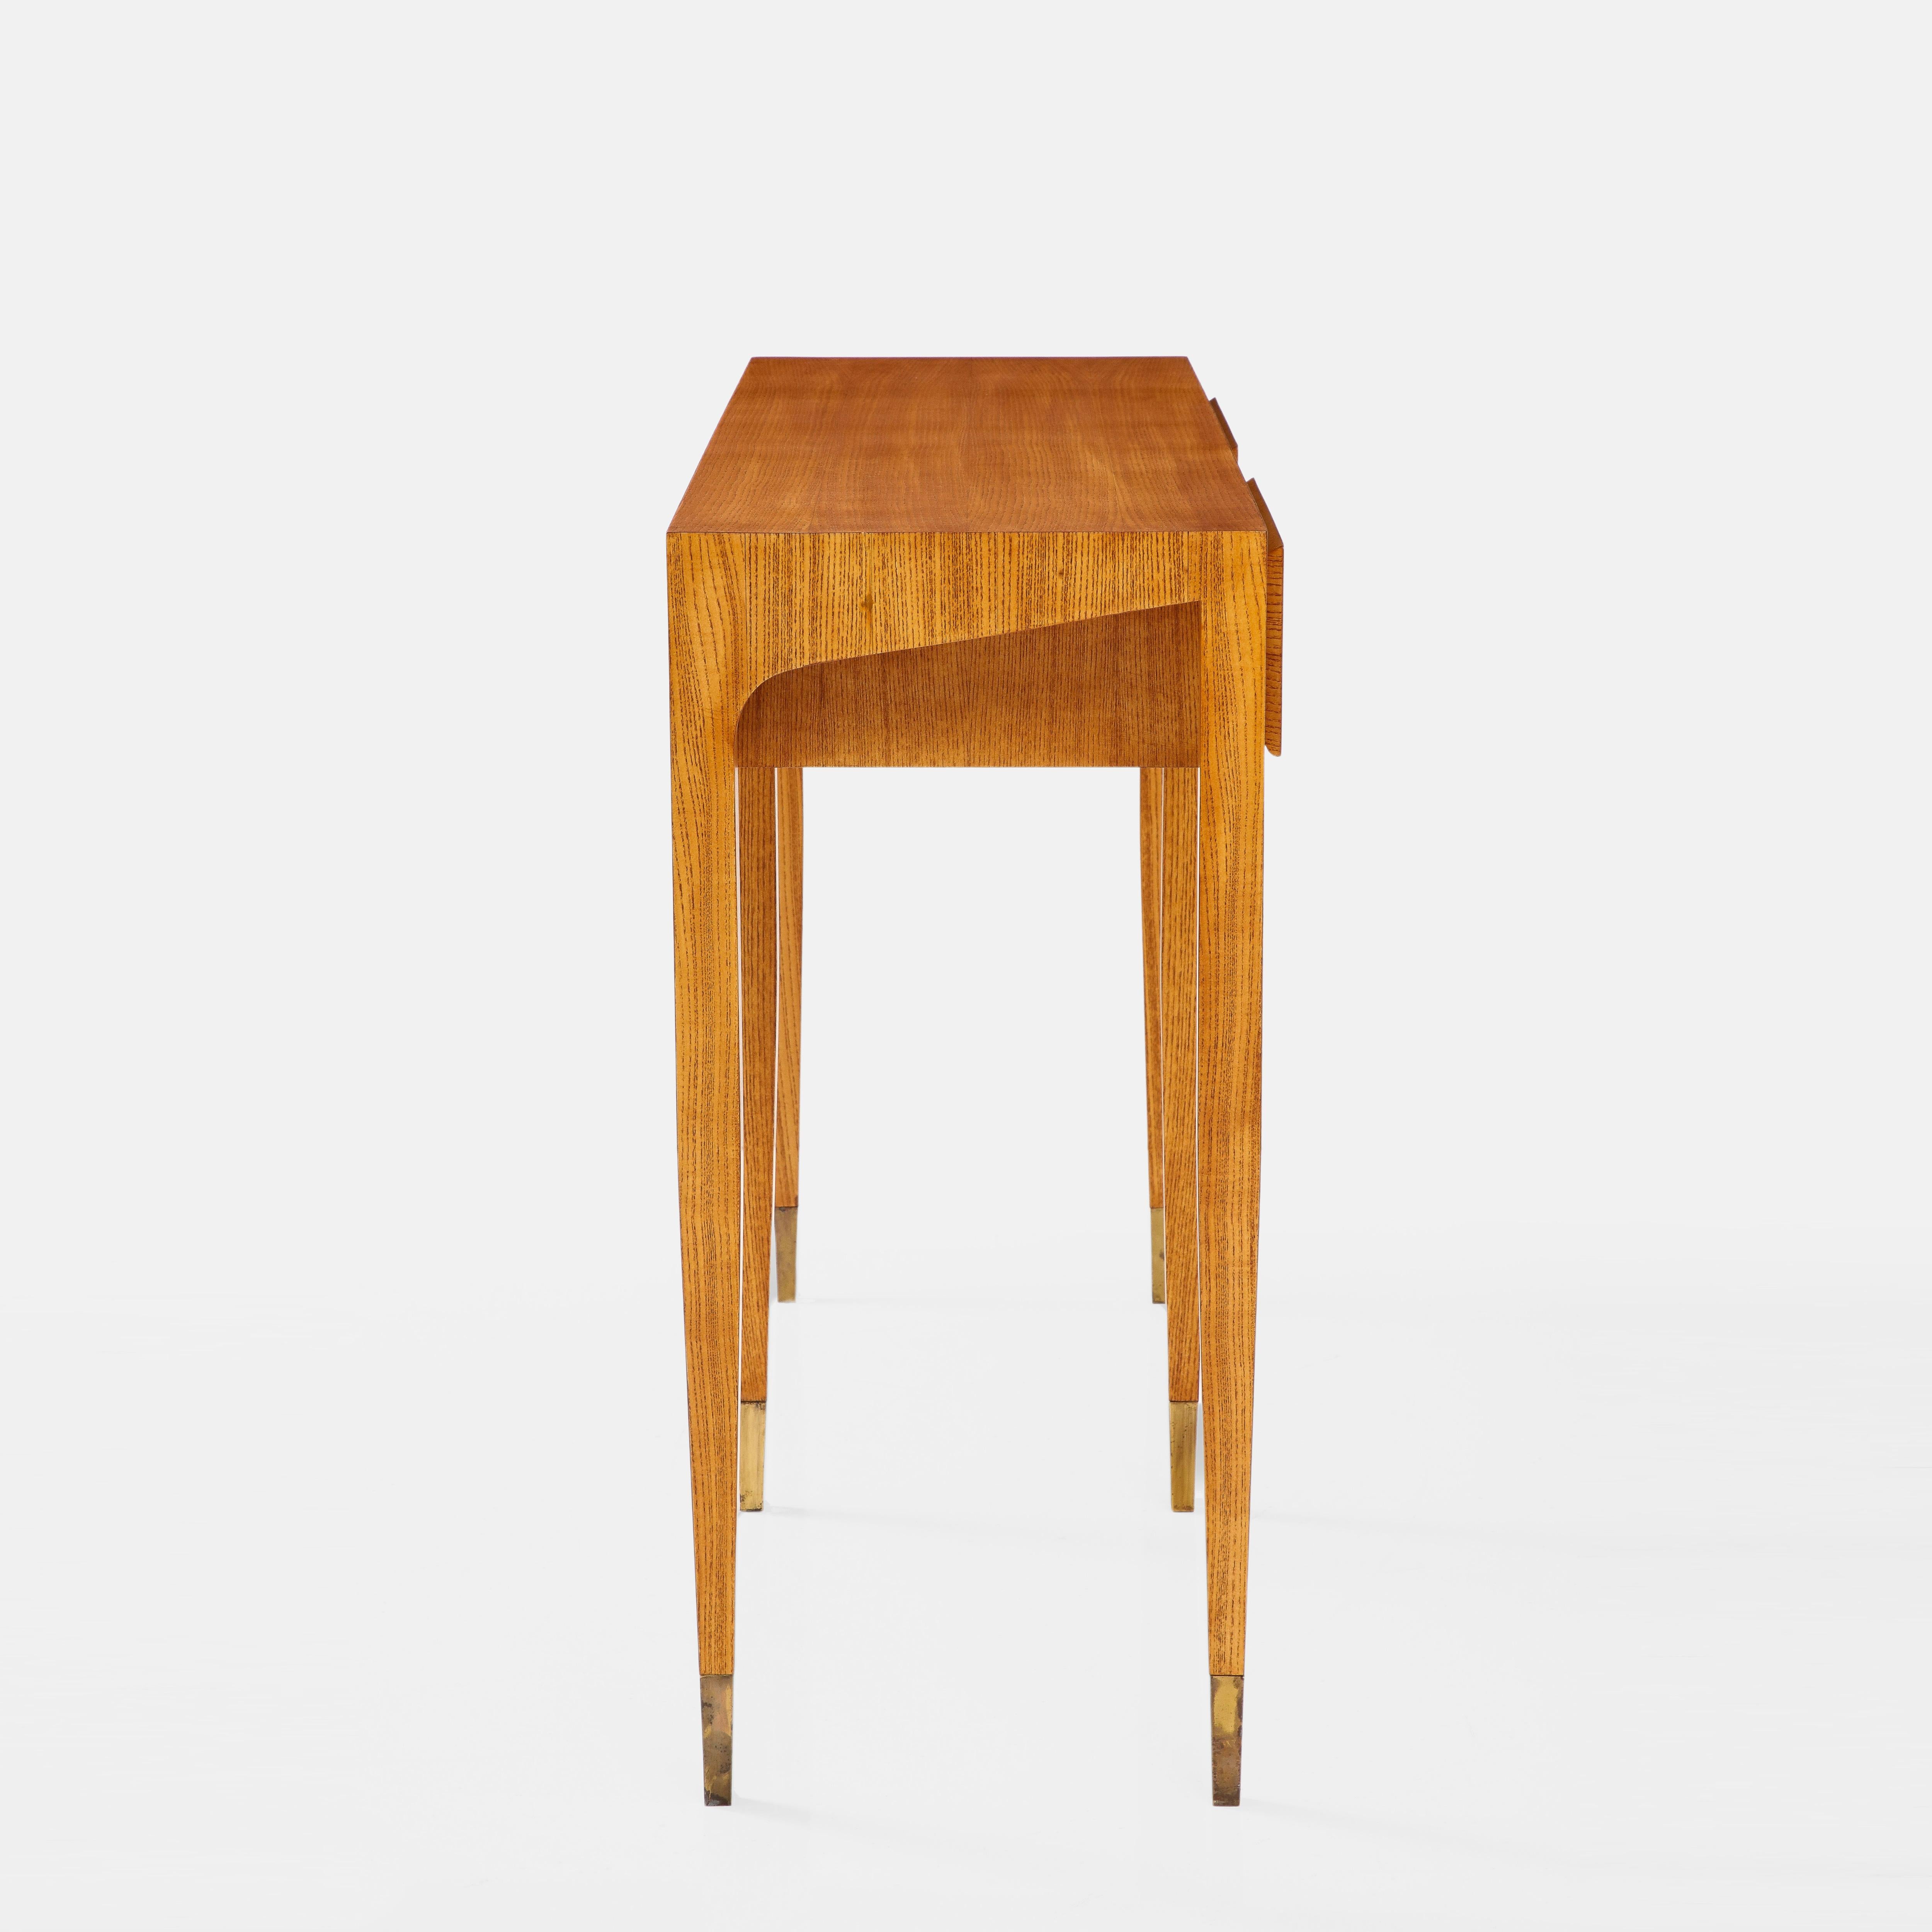 Polished Gio Ponti for Giordano Chiesa Rare Ash Wood Console, Italy, 1950s For Sale